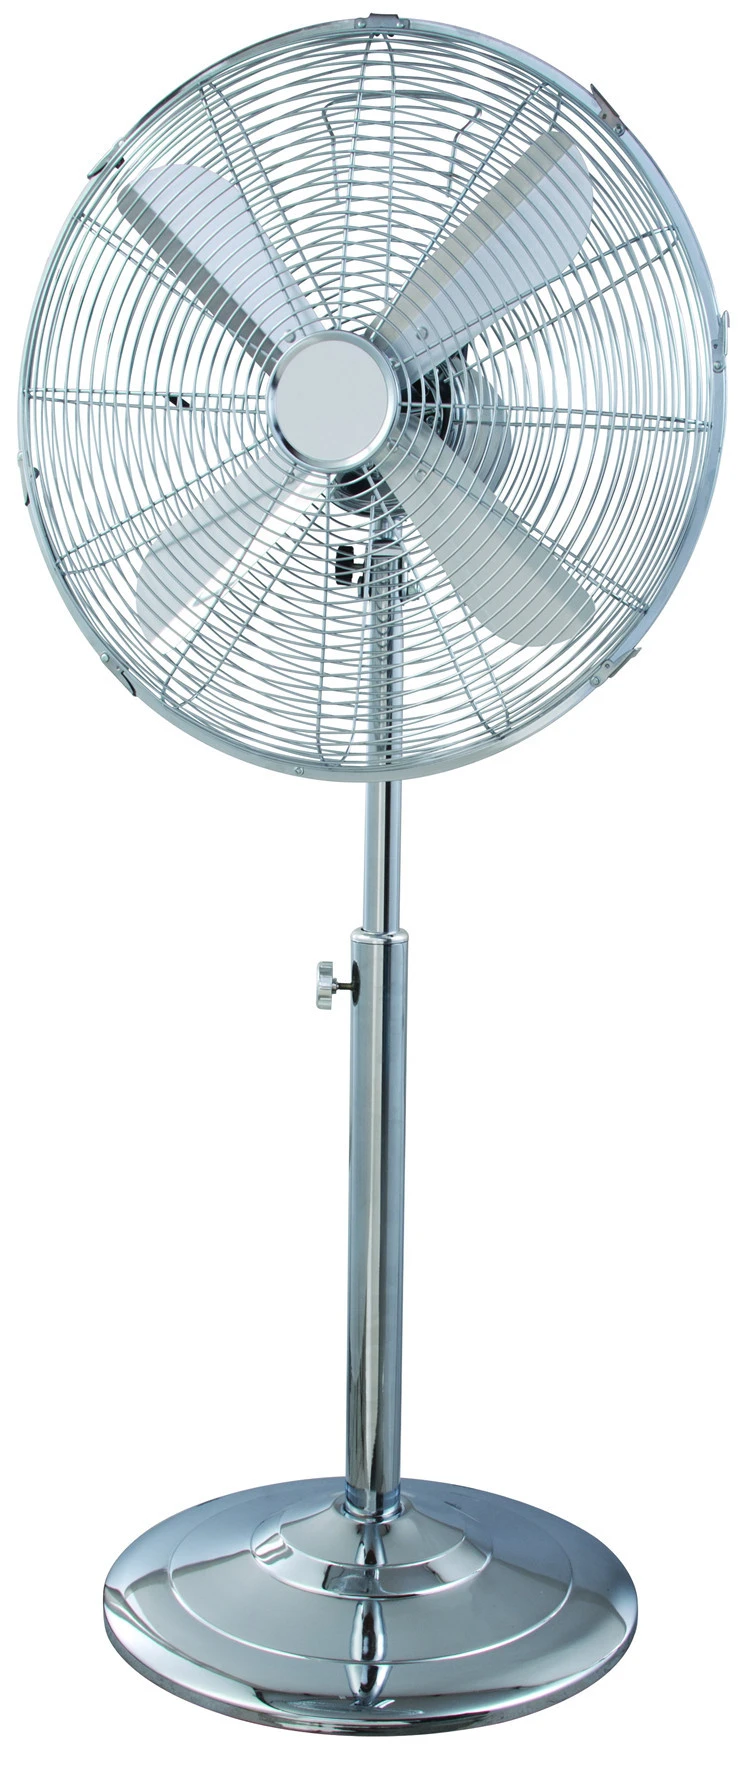 Summer hot sales electric room metal stand fan 16 inch with oscillation